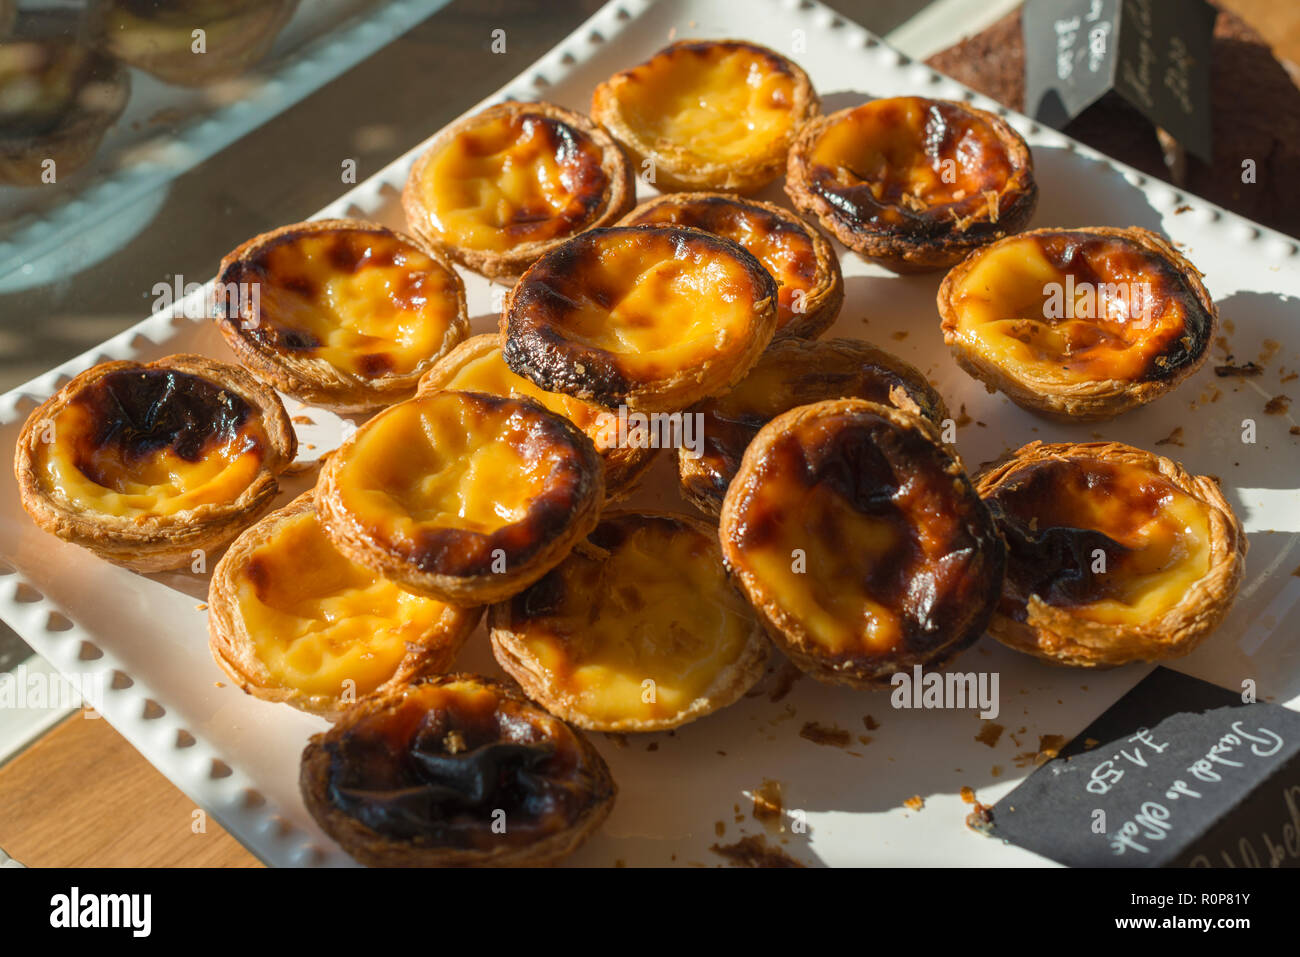 Pastel de nata is a Portuguese egg tart pastry dusted with cinnamon. Stock Photo